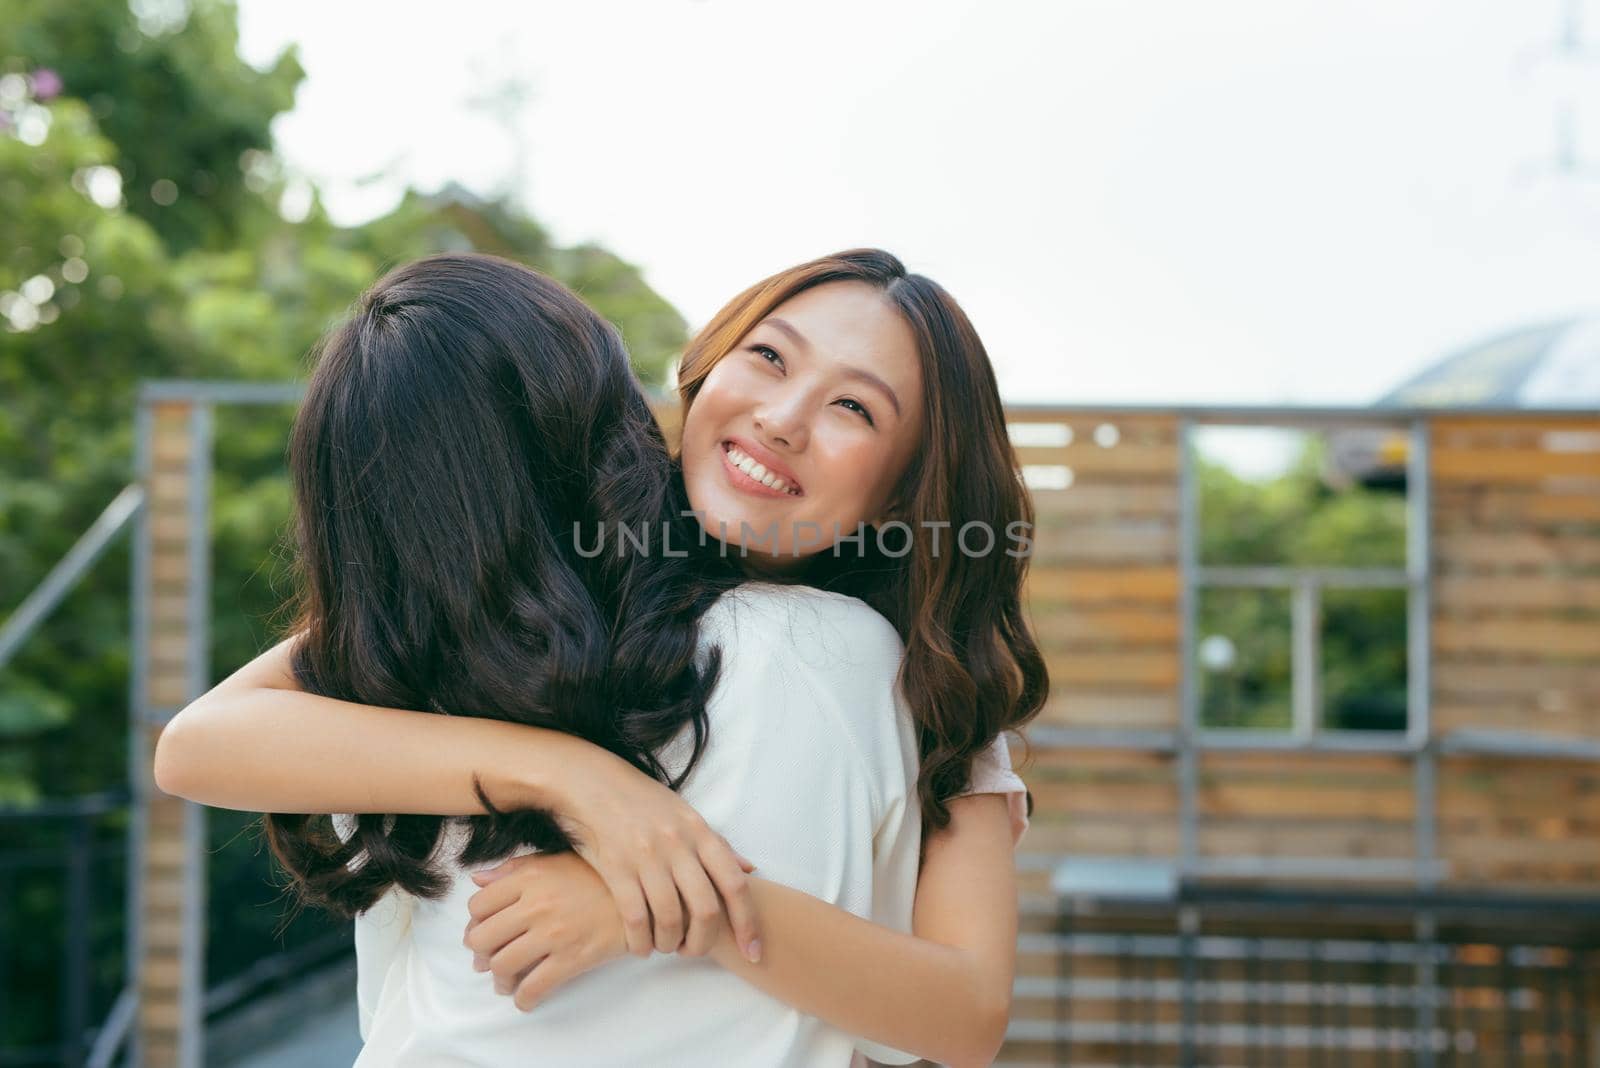 Beauties in style. Two beautiful young well-dressed women smiling at camera while standing embracing outdoors